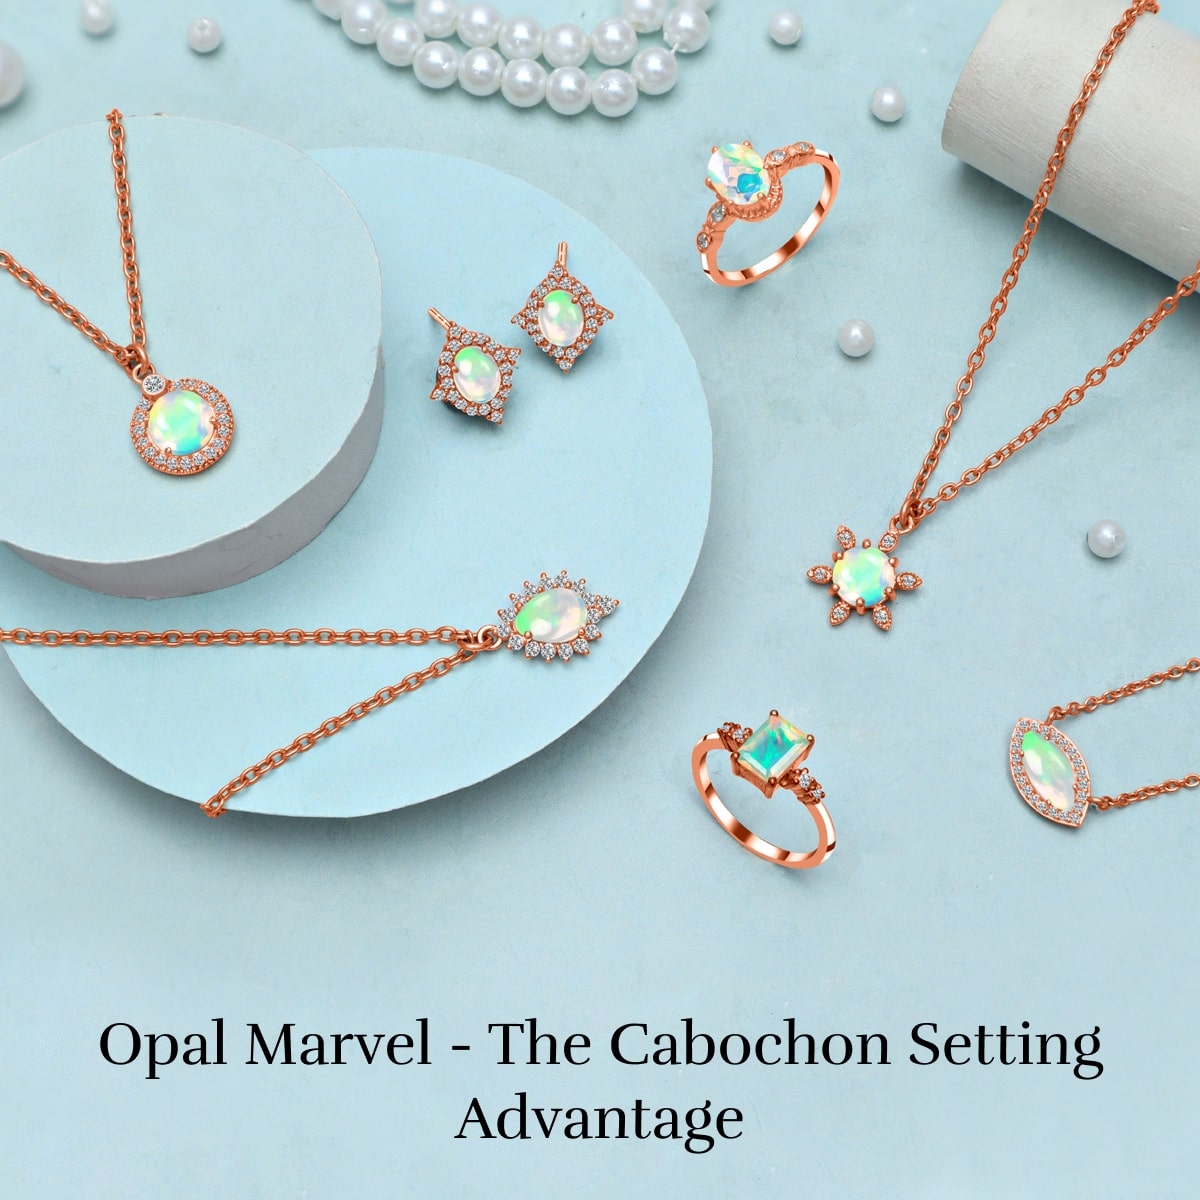 Why Cabochon Setting is Ideal for Opal Gemstone Jewelry